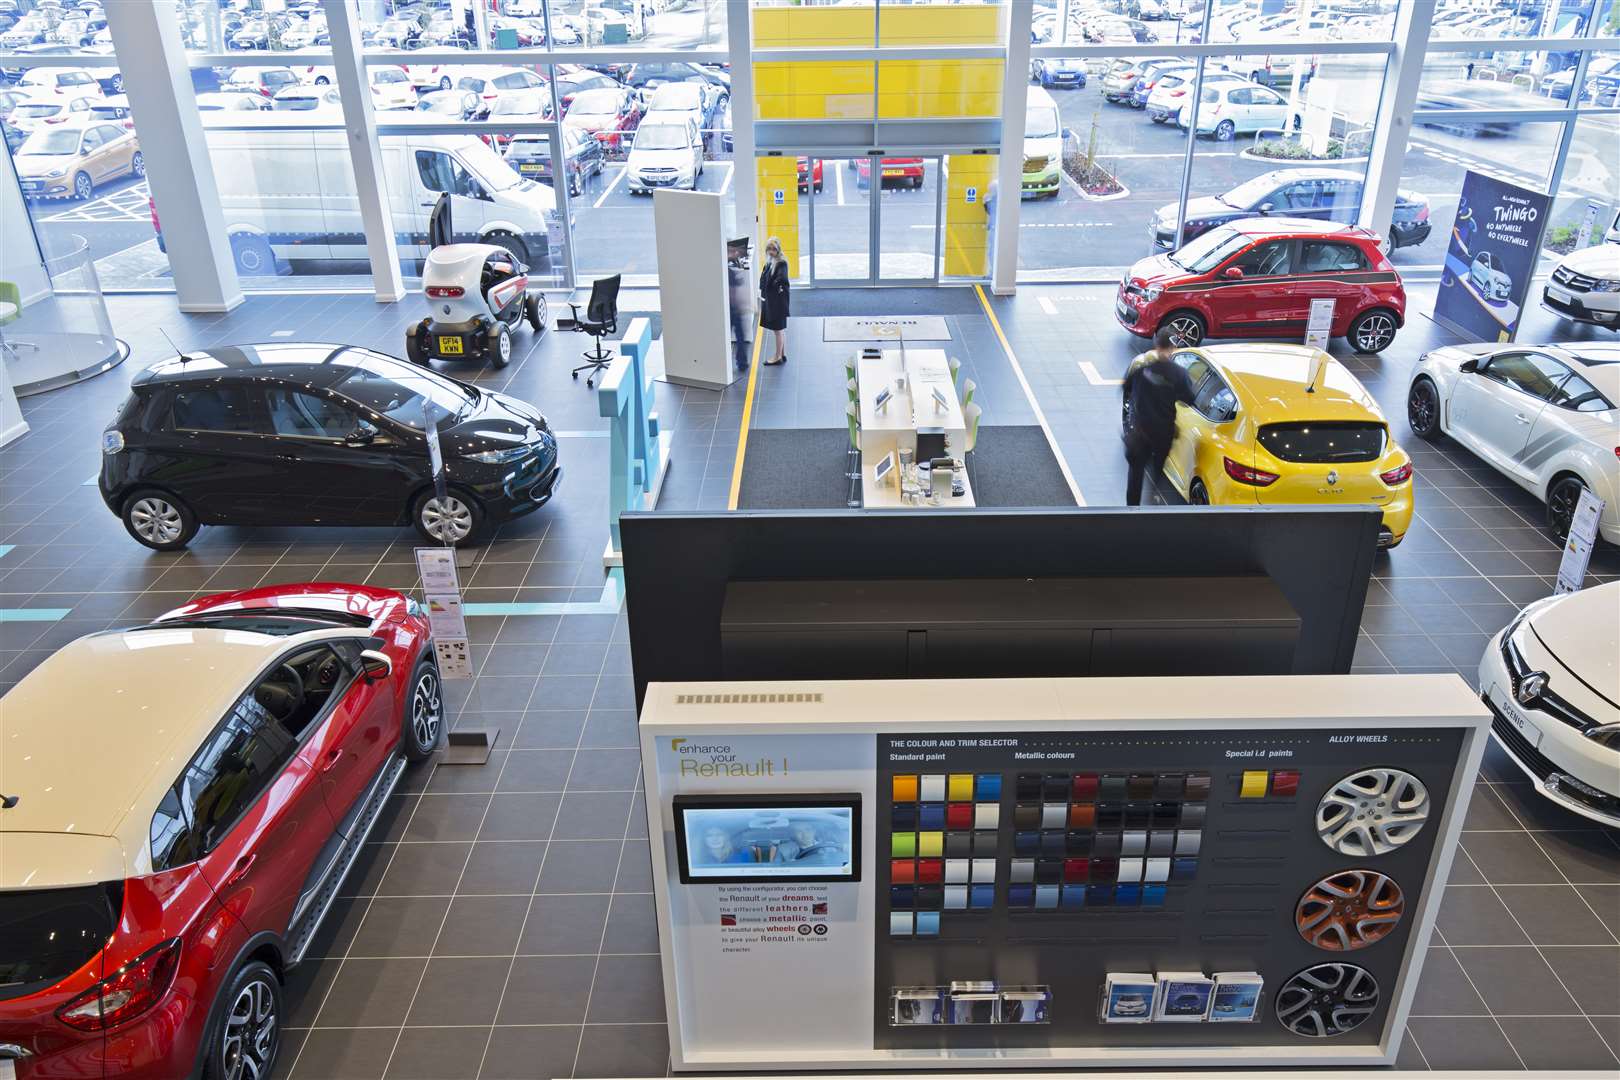 The car sales specialist has opened new showrooms in Maidstone for 2015